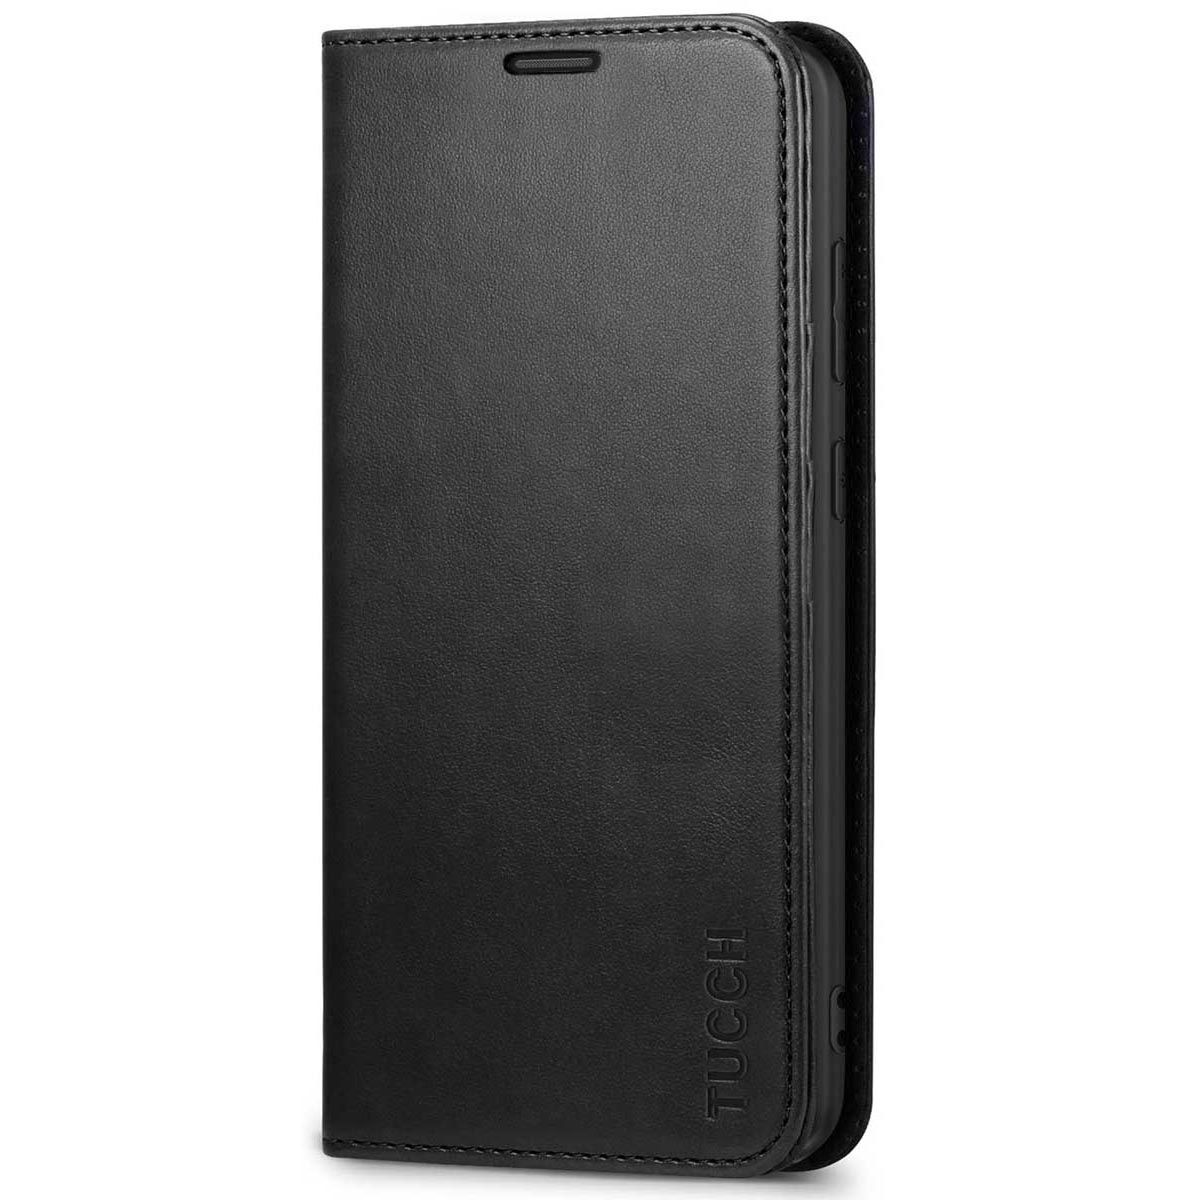 Kickstand Extra-Shockproof Card Holders Leather Cover Wallet for Samsung Galaxy S10 Plus Flip Case Fit for Samsung Galaxy S10 Plus 